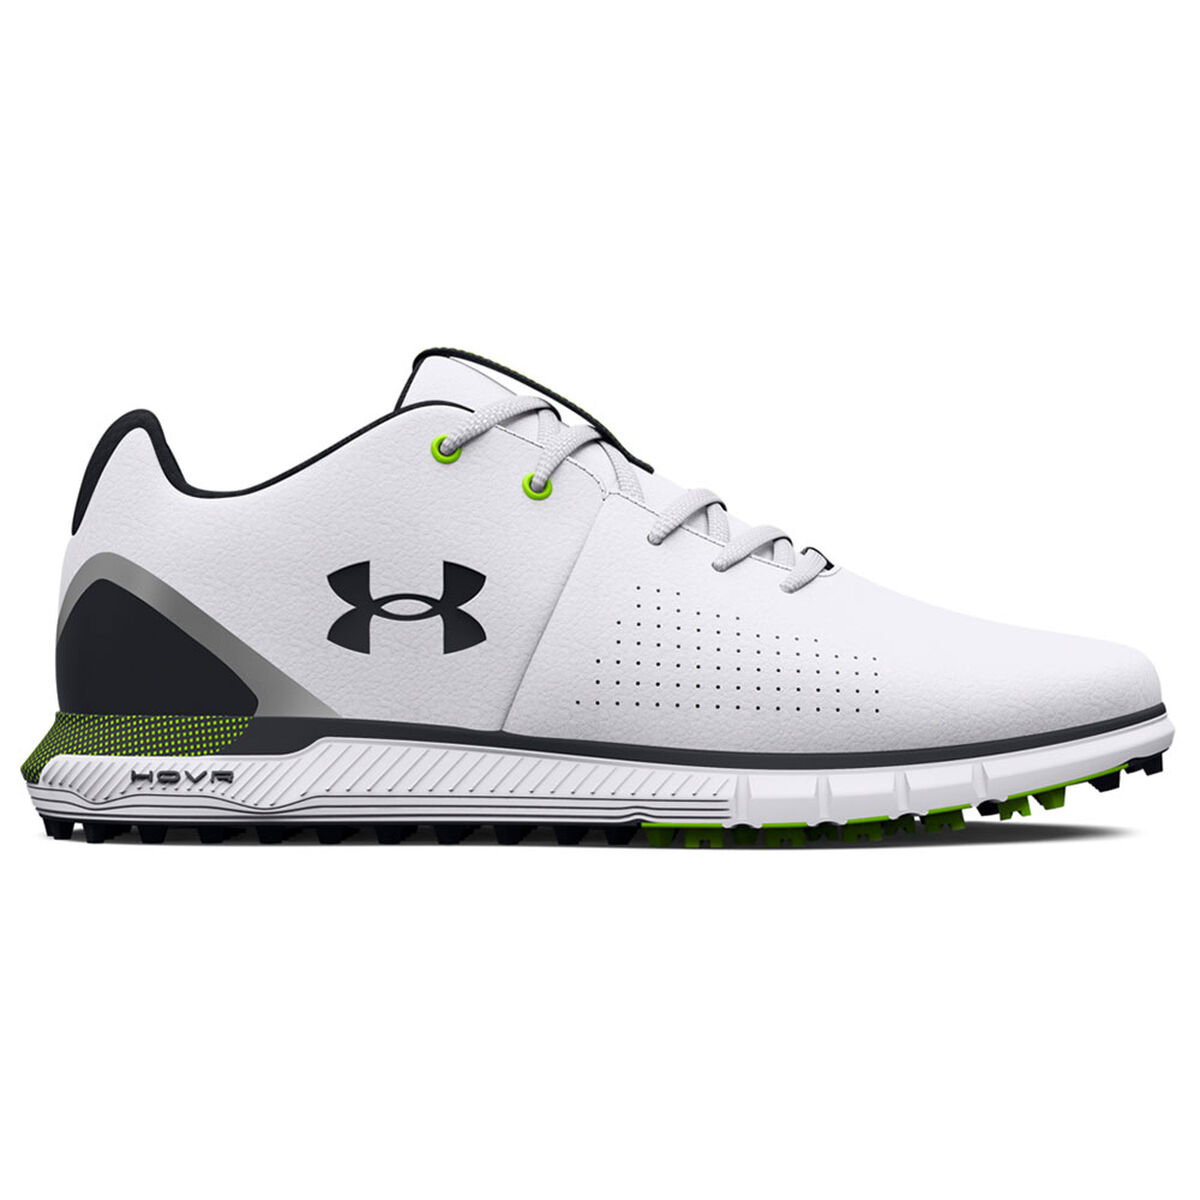 Under Armour Men’s HOVR Fade 2 Spikeless Golf Shoes, Mens, White/black/black, 10 | American Golf